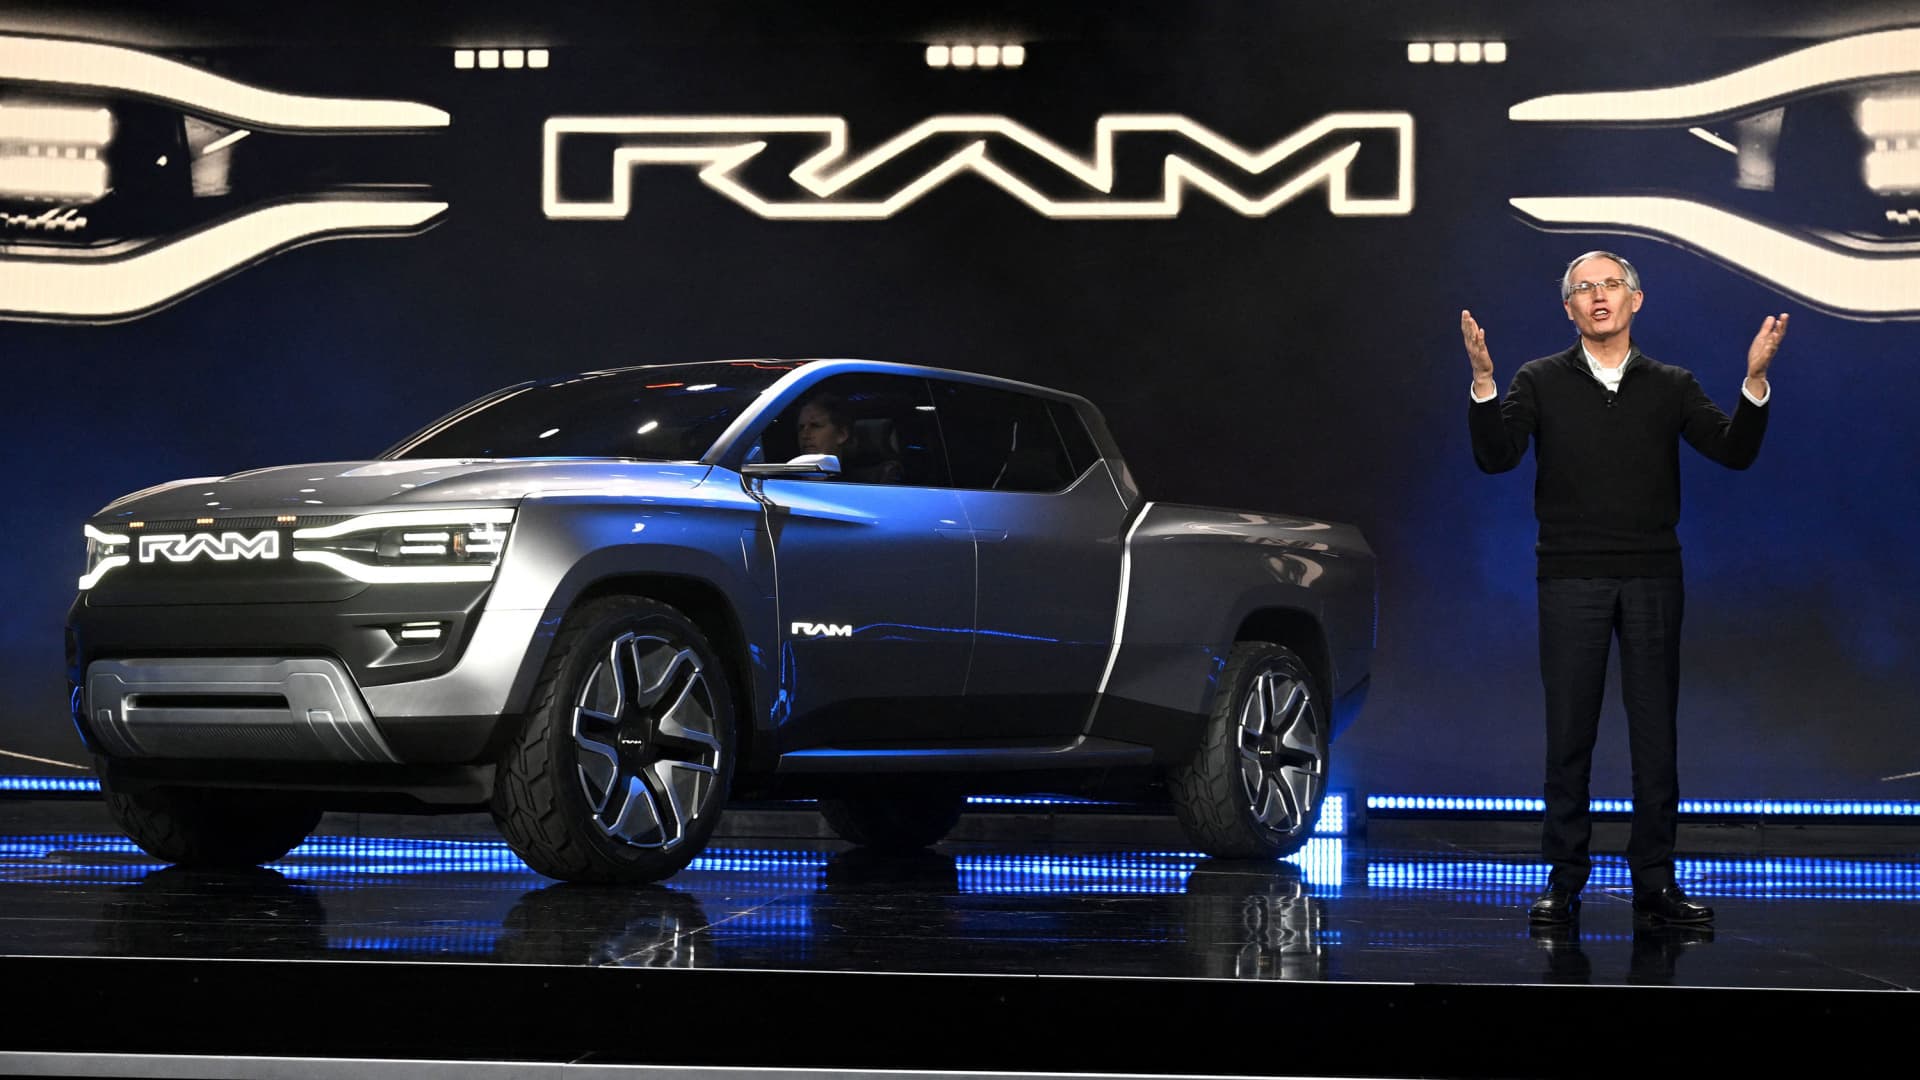 Stellantis CEO Carlos Tavares discusses the Ram 1500 Revolution EV Concept truck during his keynote address at the Consumer Electronics Show (CES) in Las Vegas, Nevada, on January 5, 2023.